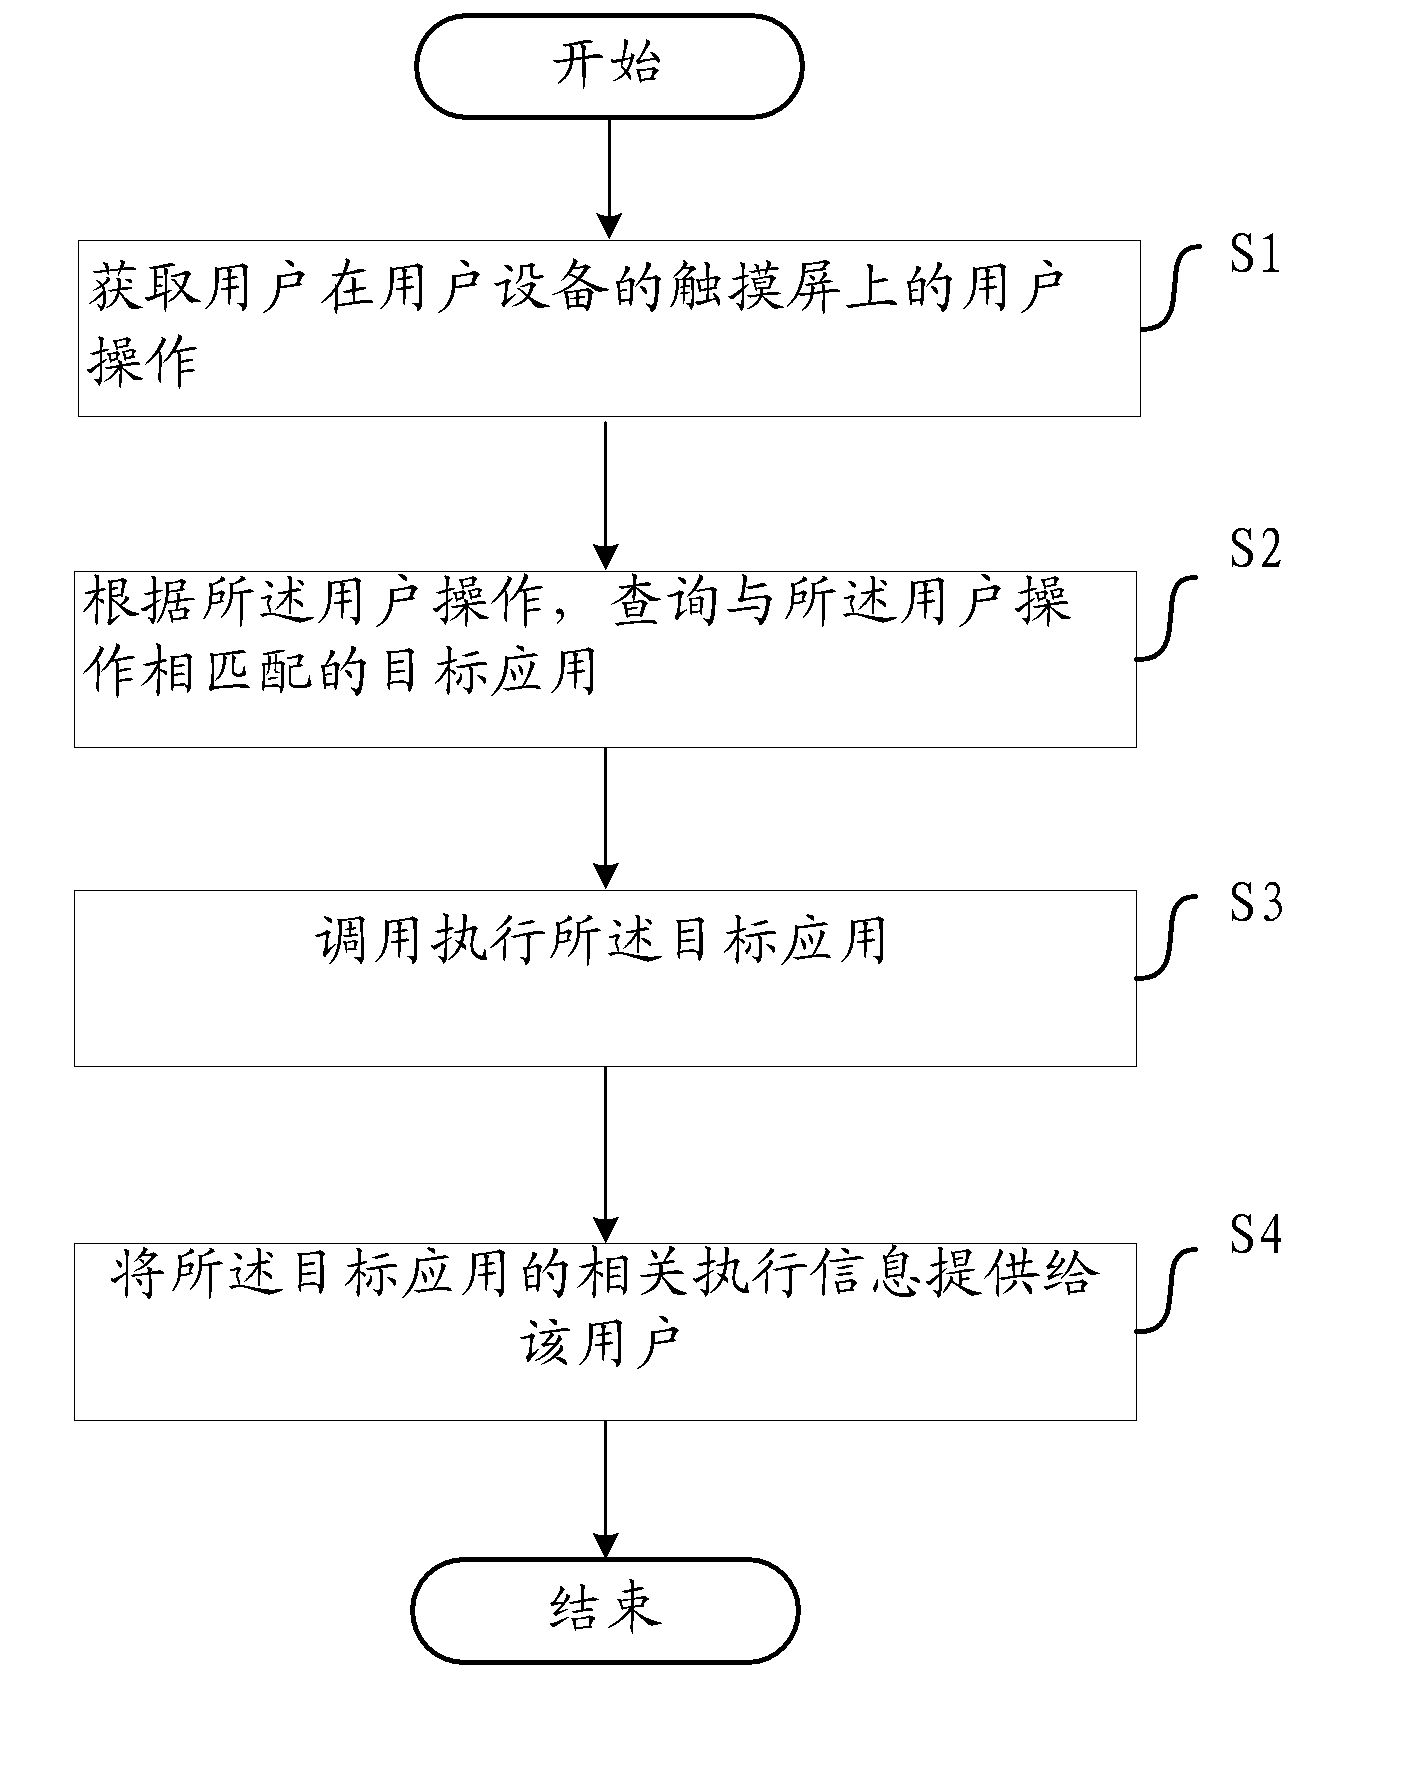 Method and device for scheduling application according to touch screen operation of user